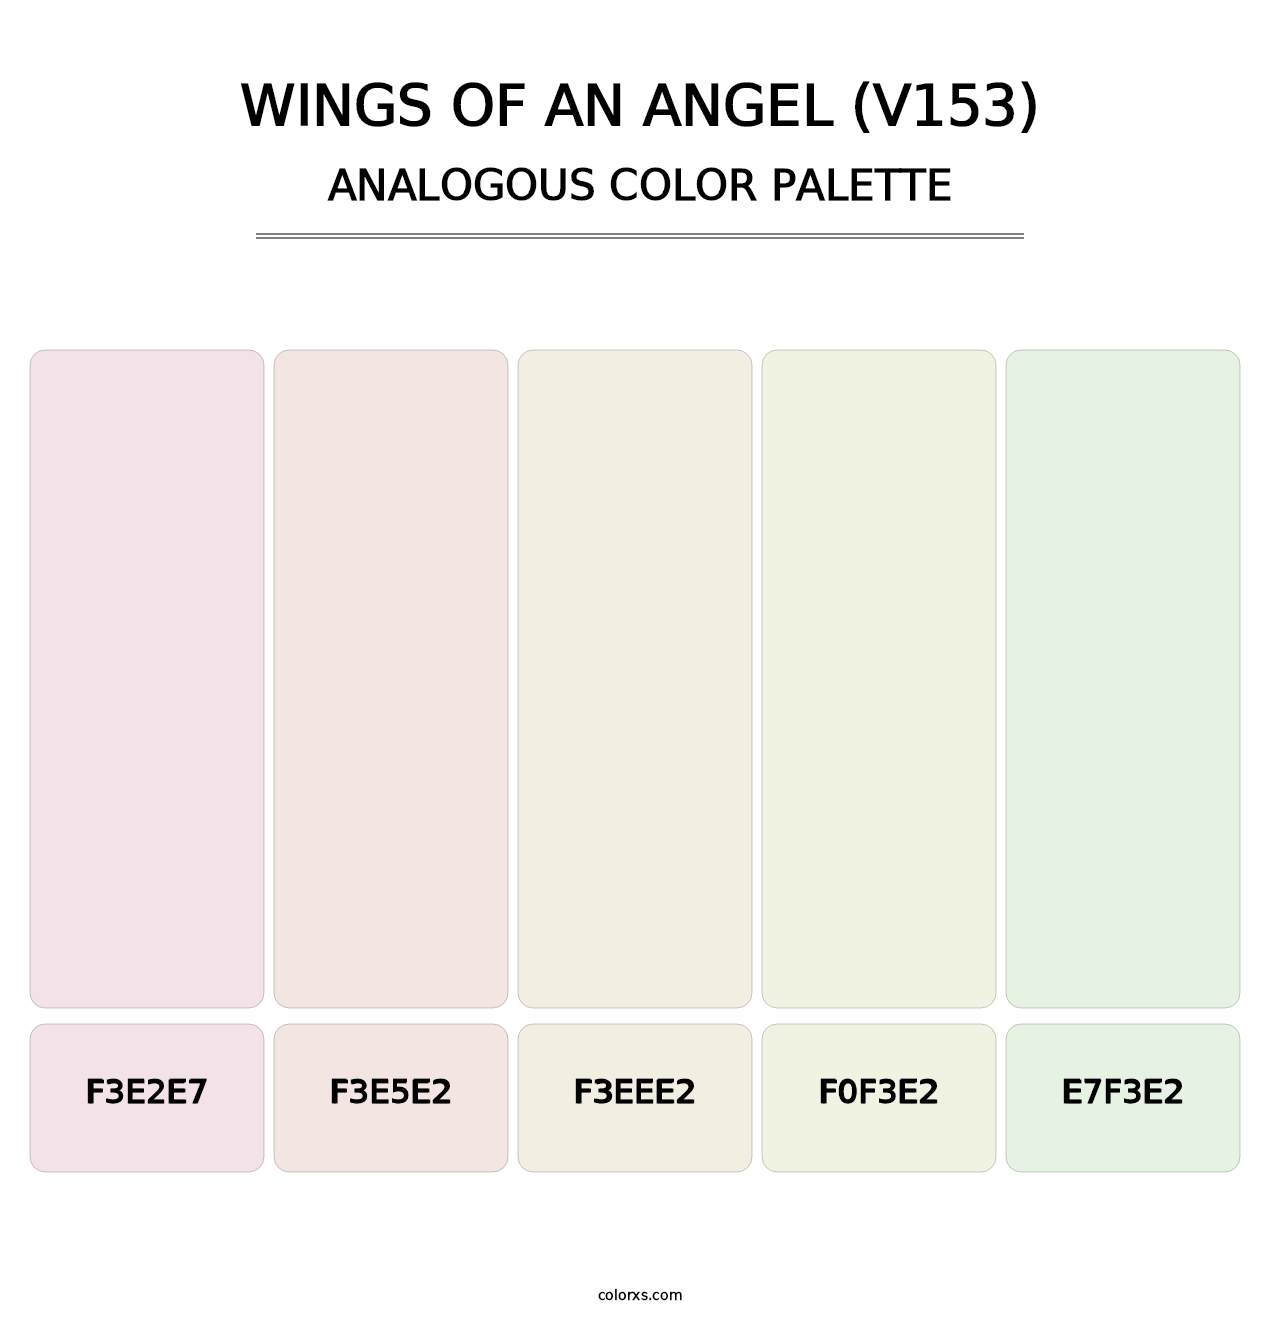 Wings of an Angel (V153) - Analogous Color Palette